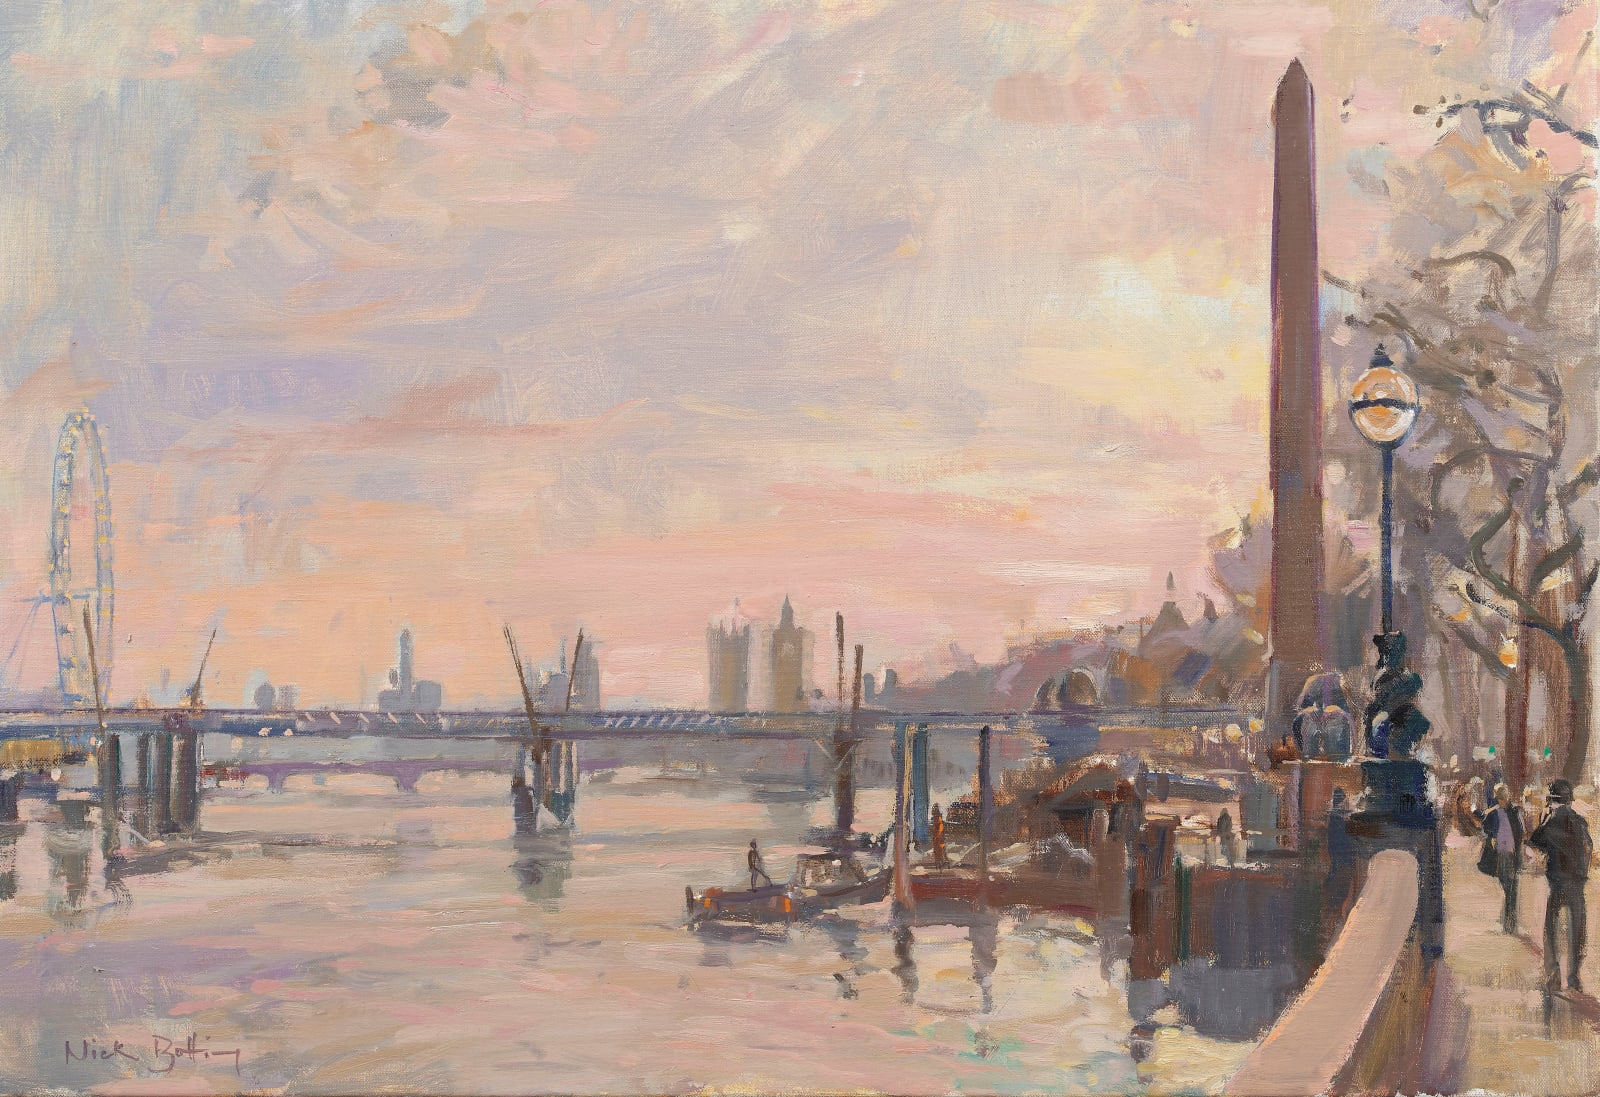 Nick Botting, Winter Afternoon, The Thames